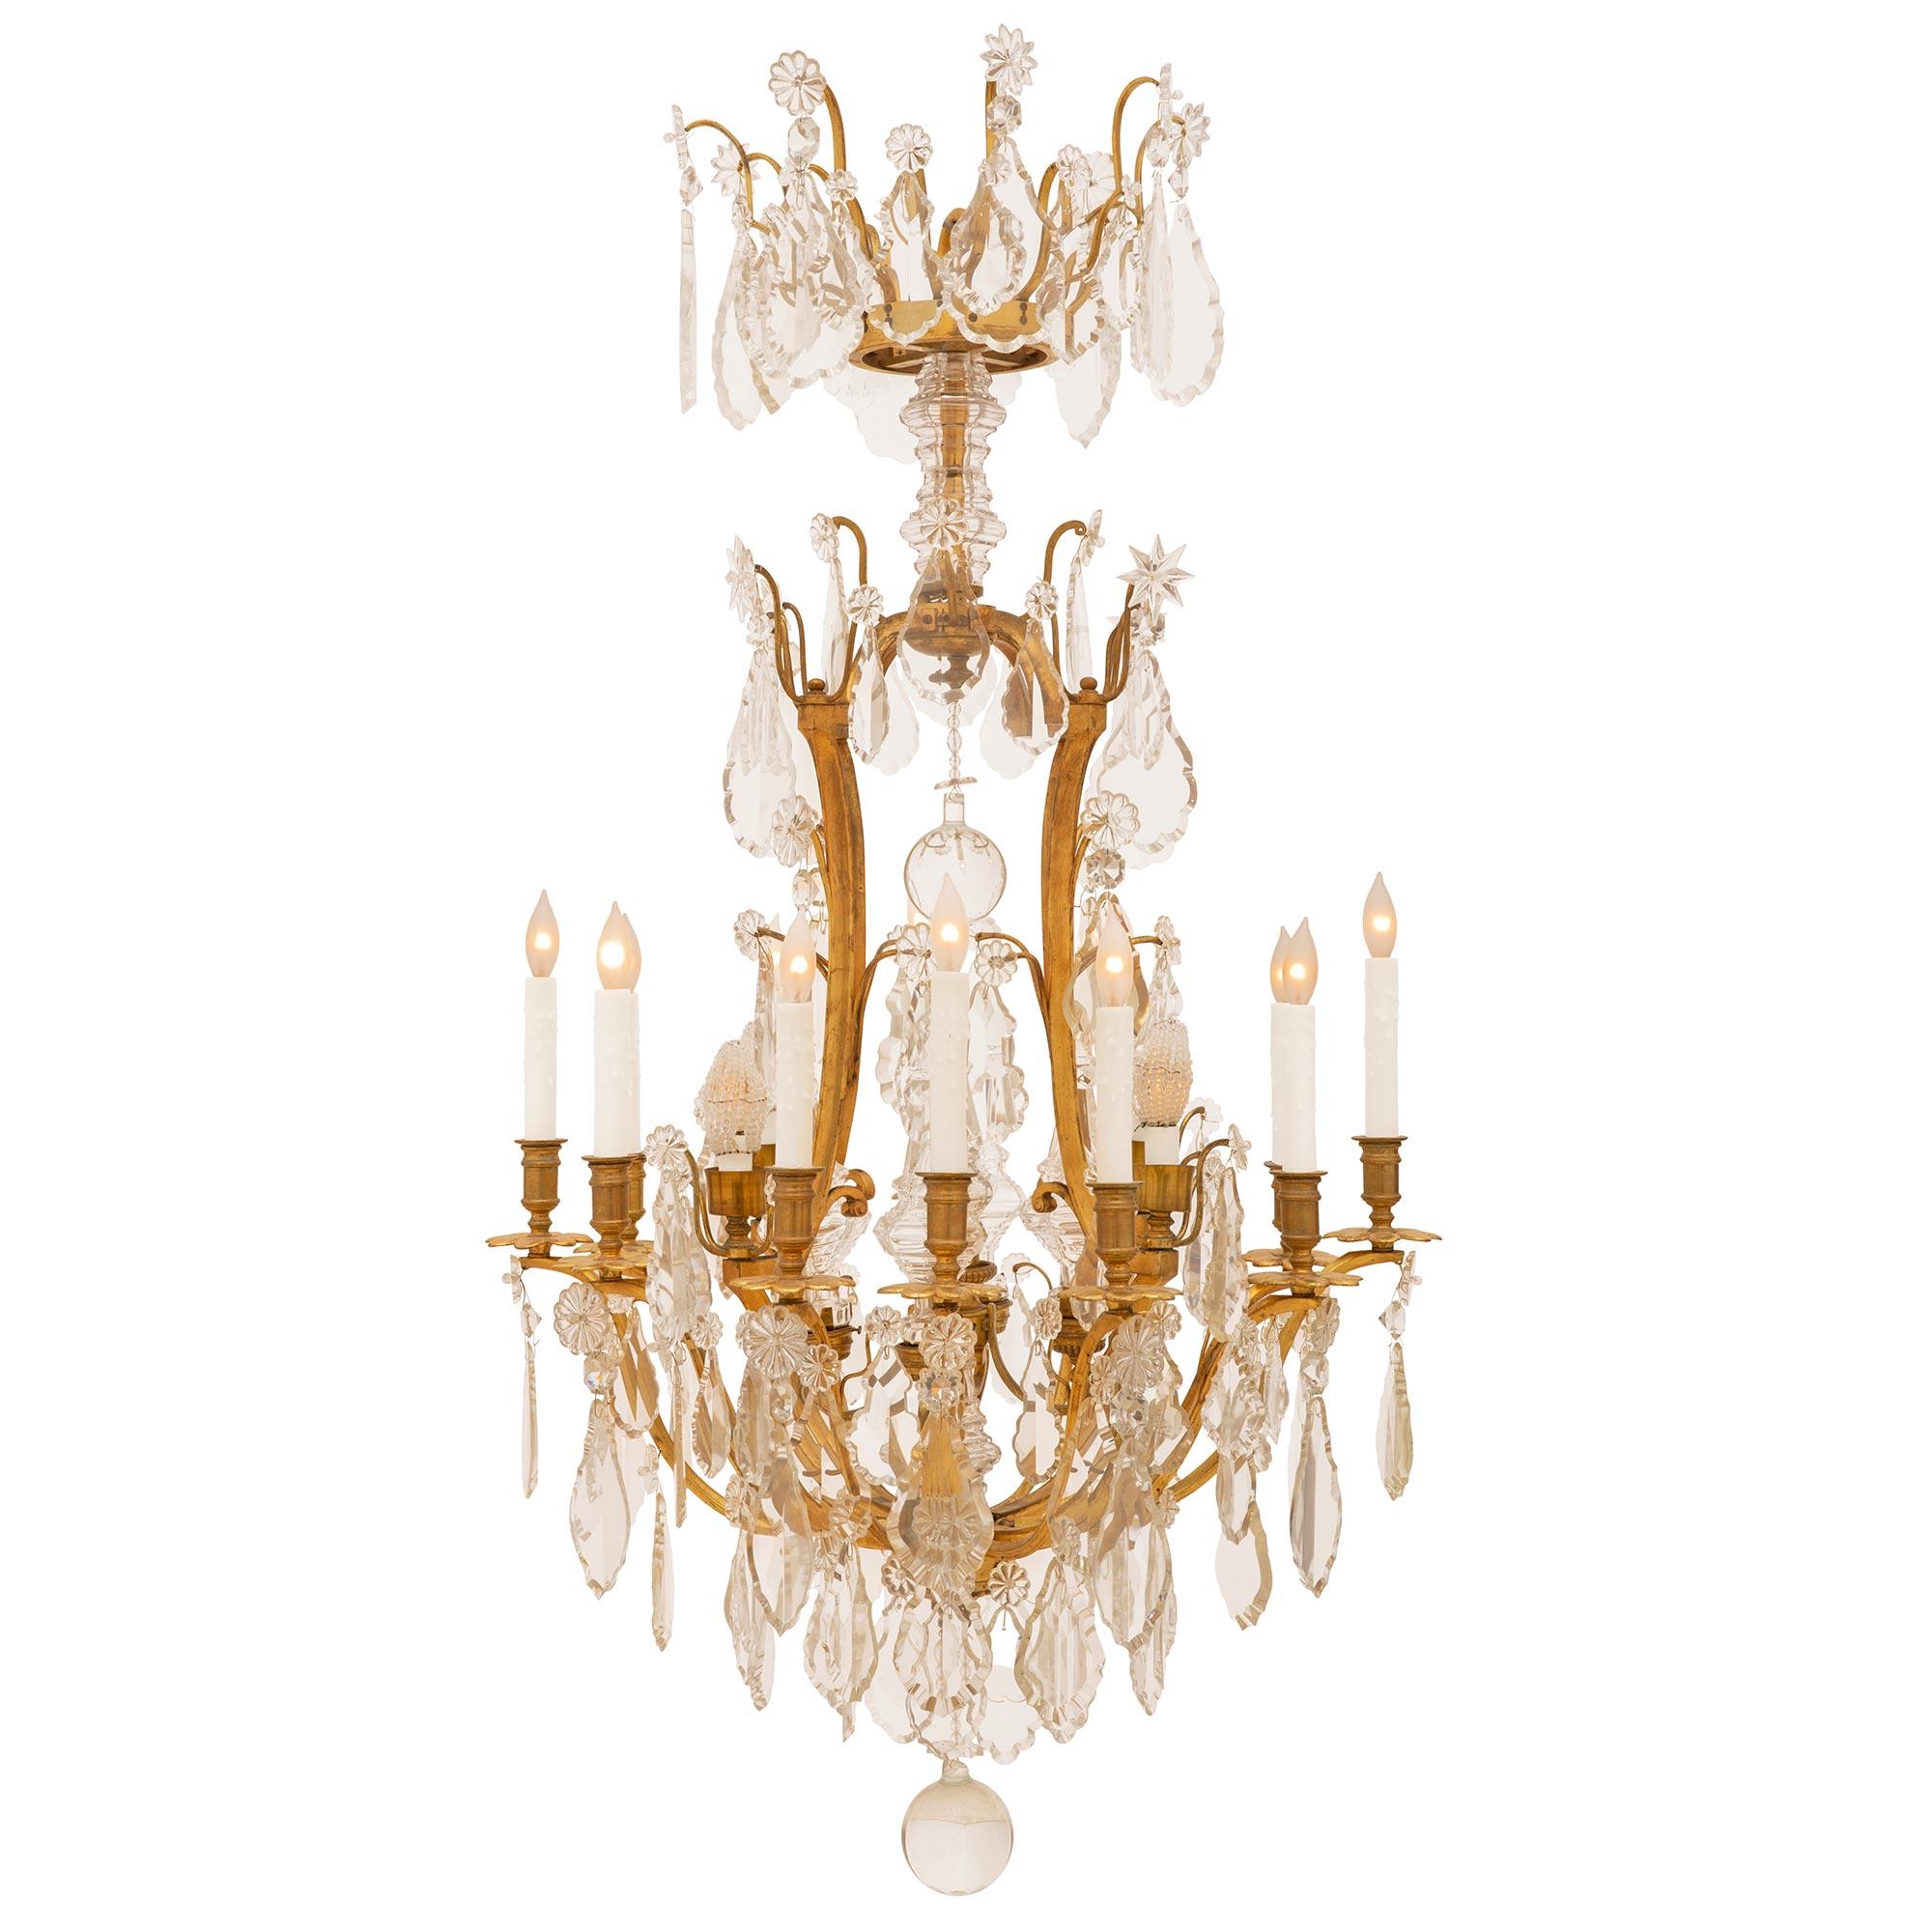 A most impressive and large scale French Louis XV st. 19th century circa. 1870, ormolu and Baccarat crystal chandelier. With 12 electrified arms and a total of 17 lights and an extensive amount of exceptional crystals hanging on 'S' scrolled arms